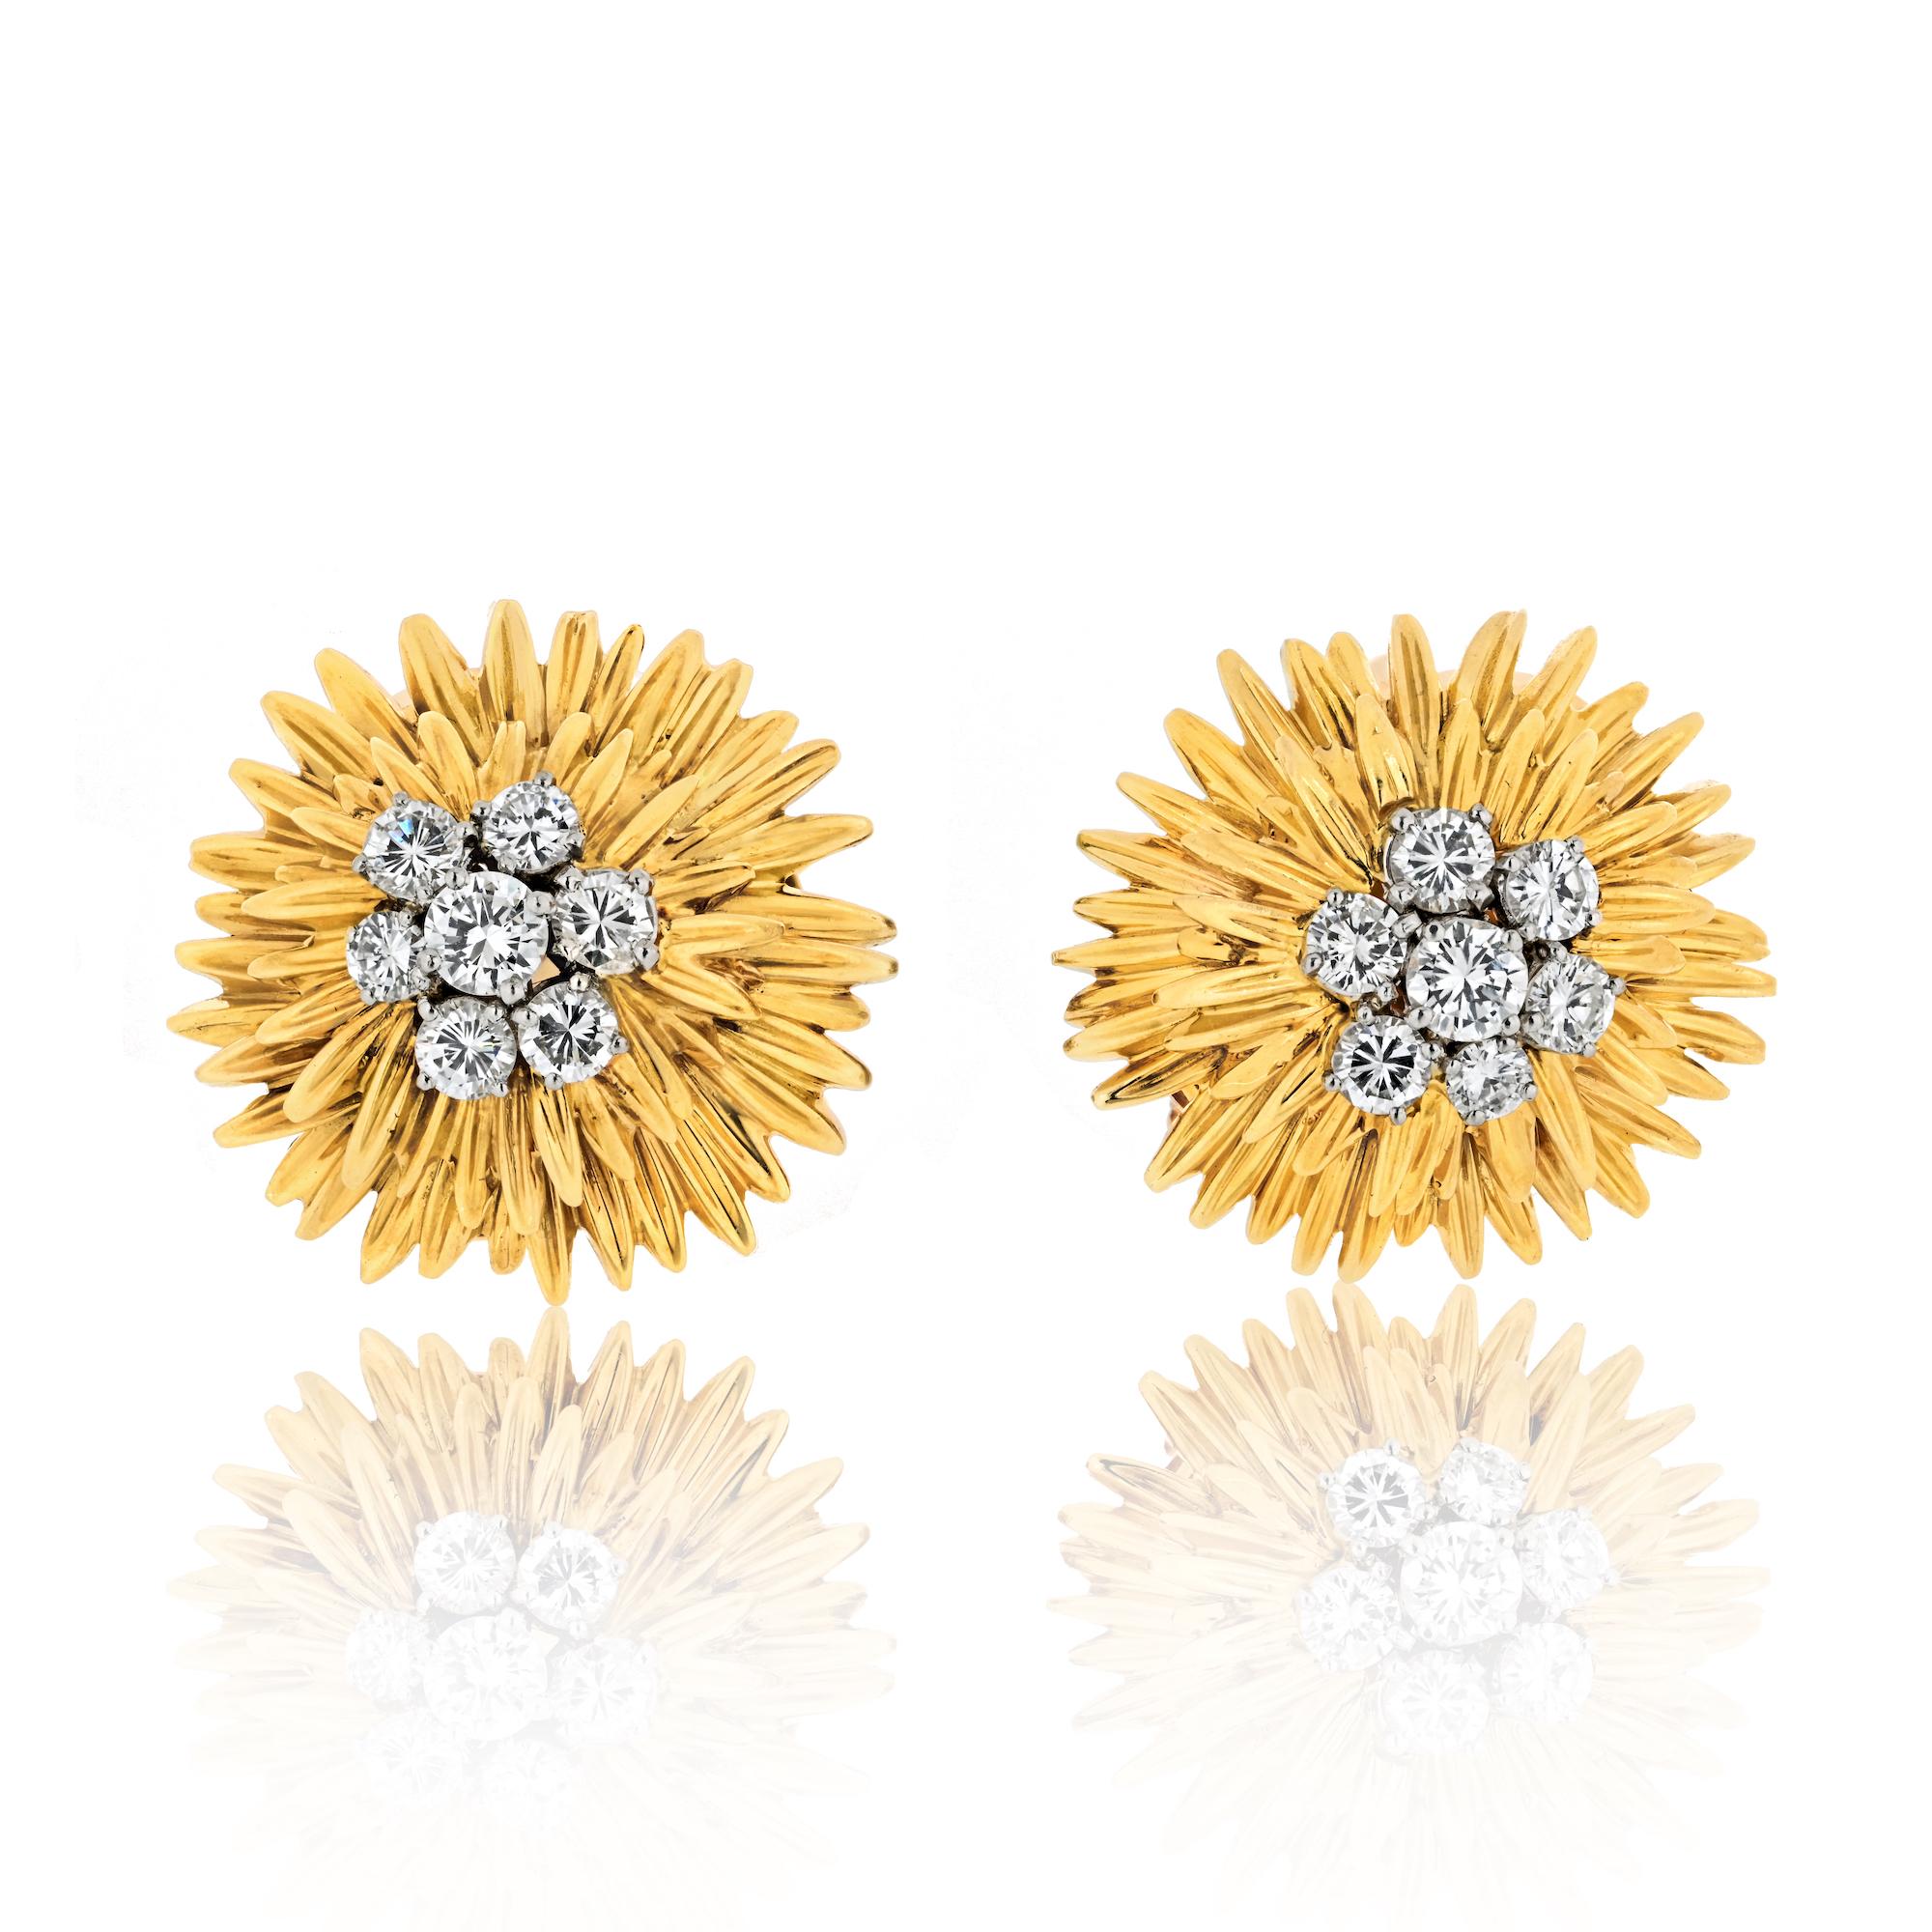 Van Cleef & Arpels 18k gold and diamond flower earrings. Centers of the earrings set with 14 round brilliant cut diamonds with total weight of
approximately 1.60 carats .Surrounded by two rows of carved yellow gold petals. Equipped with french